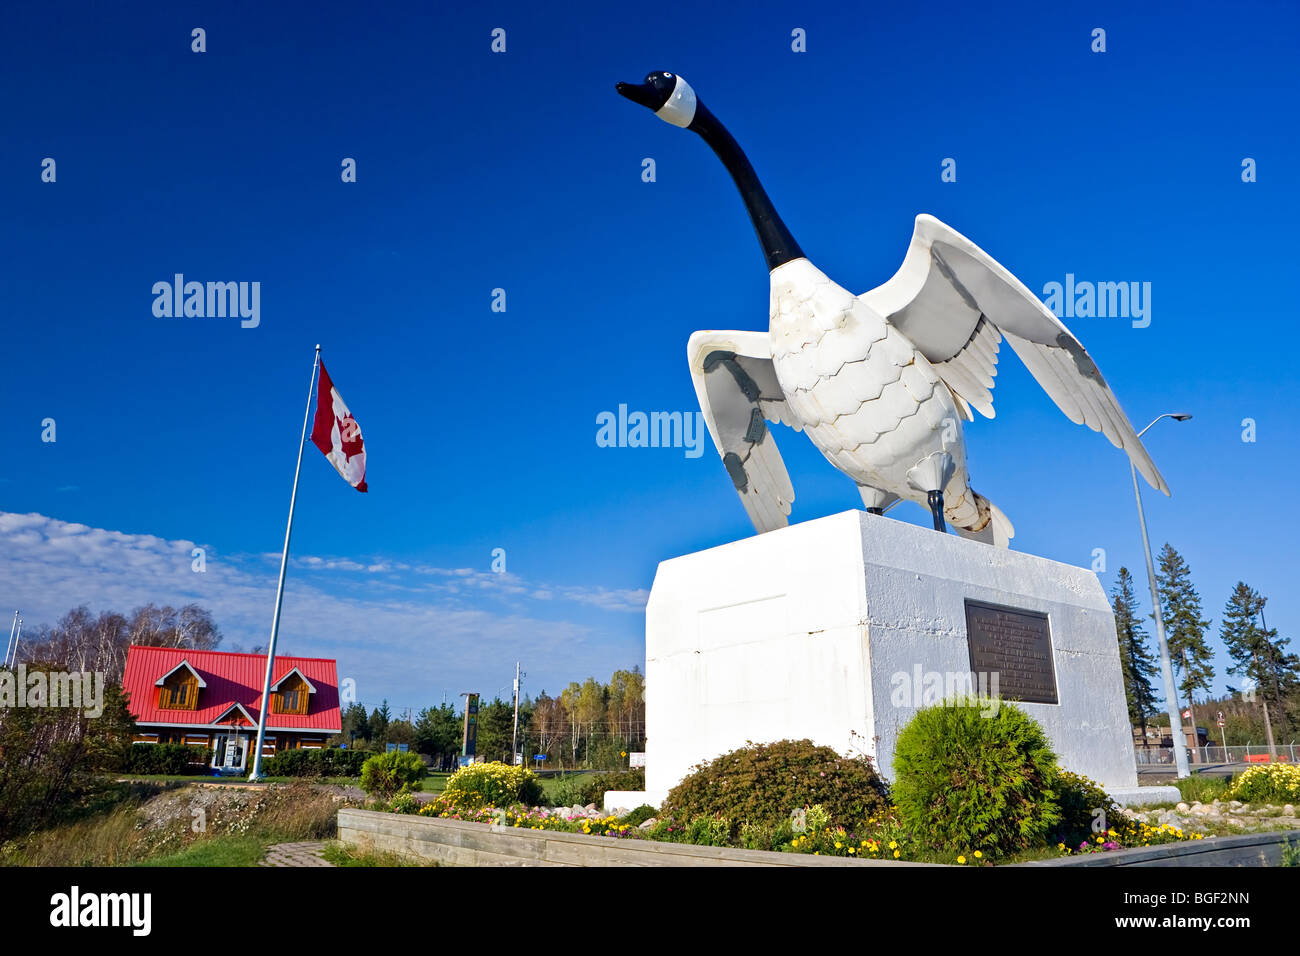 Statue of Canadian Goose at the Information Centre in the town of Wawa, Ontario, Canada. Stock Photo